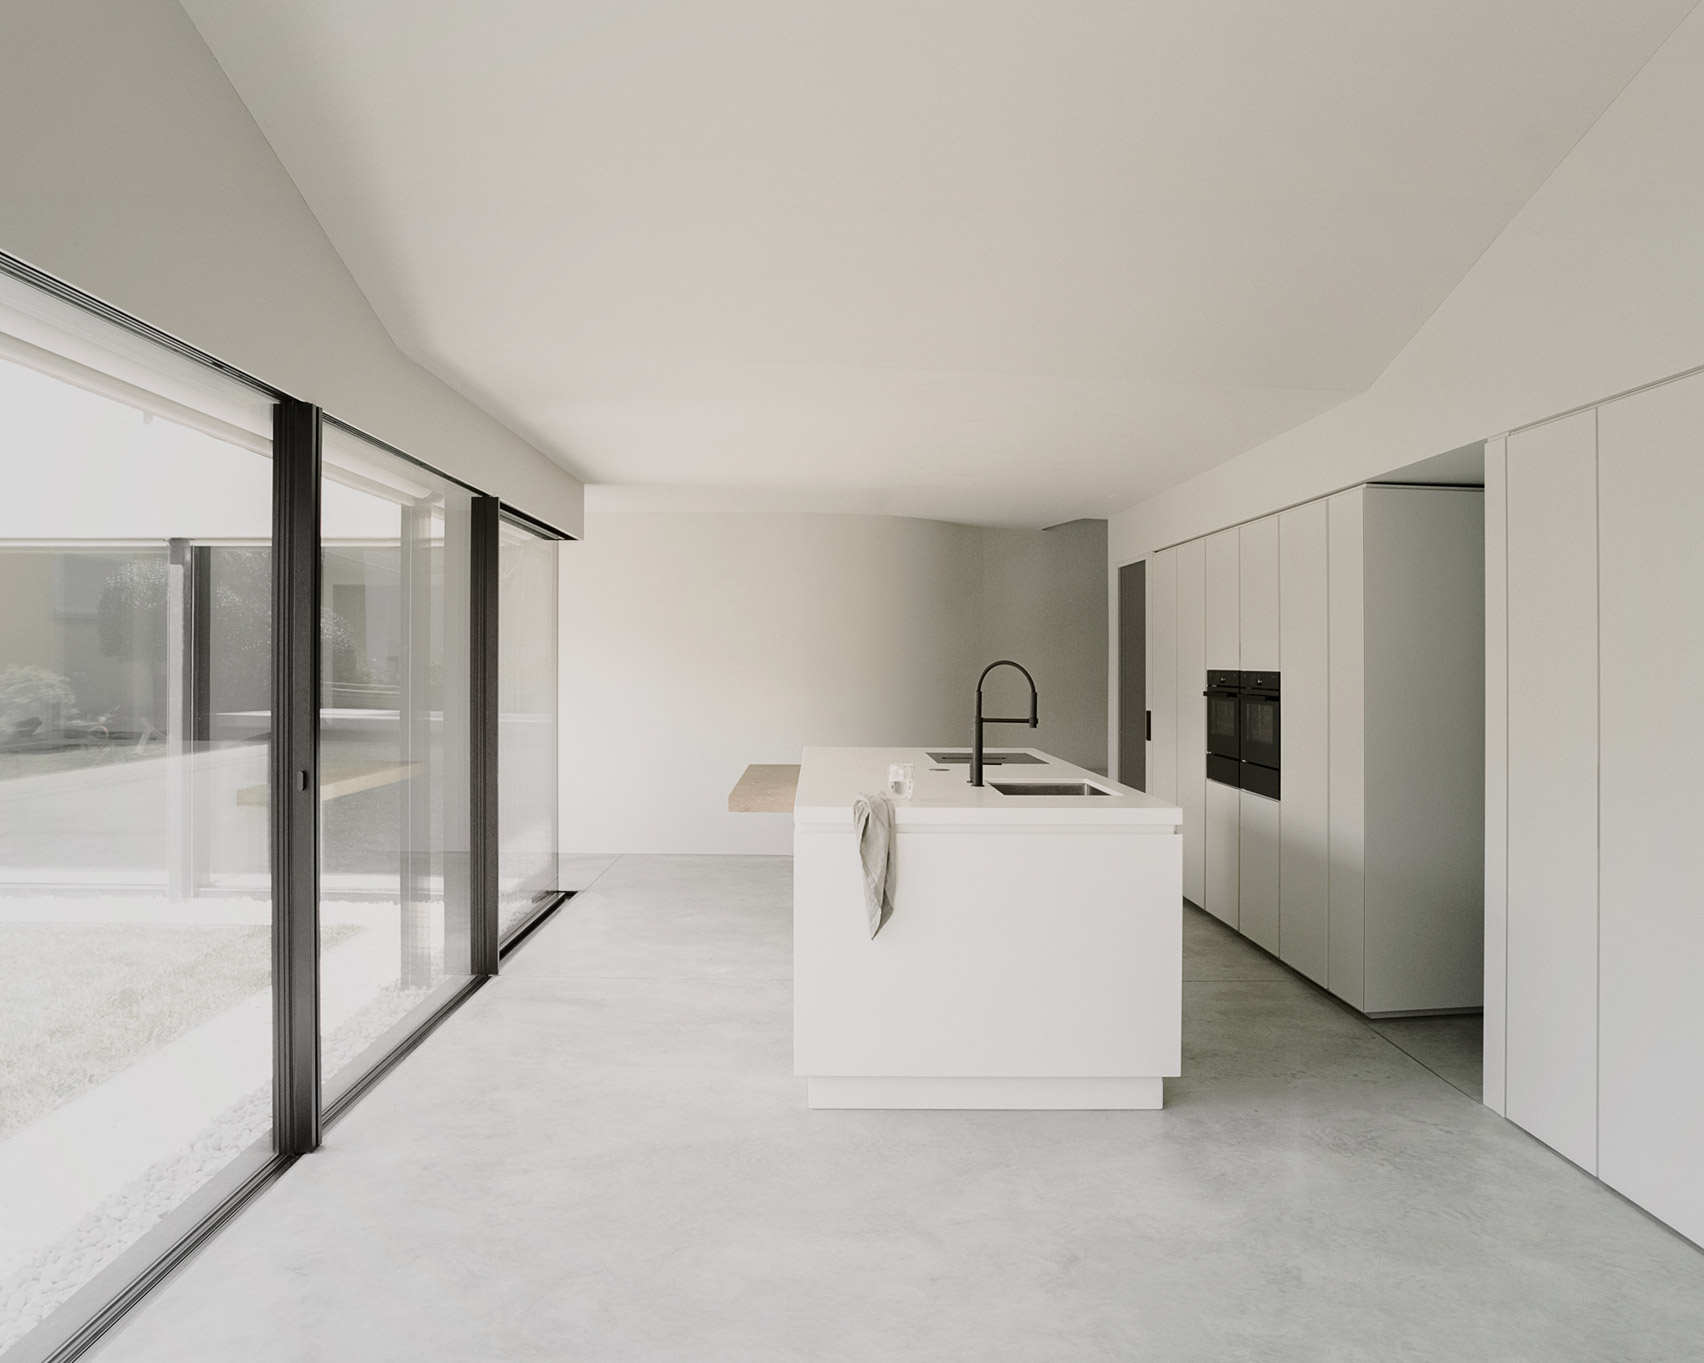 Kitchen of Pyramid House in Switzerland by DF_DC